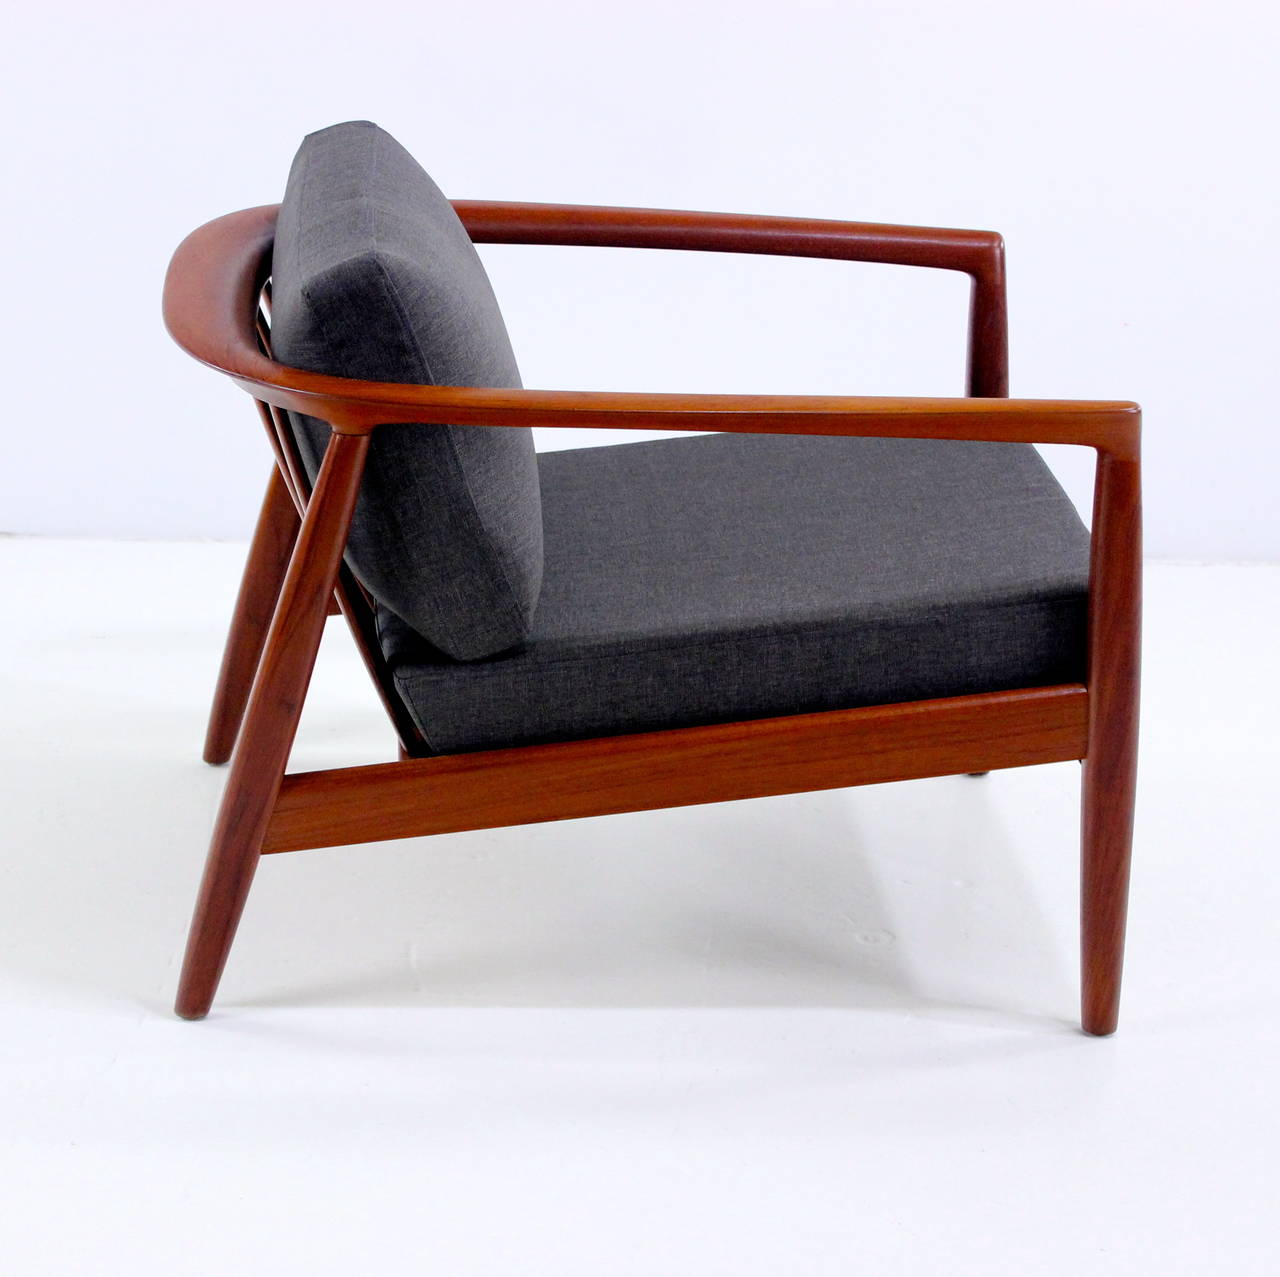 Pair of Danish Modern Teak Armchairs Designed by Folke Ohlsson for DUX In Excellent Condition For Sale In Portland, OR